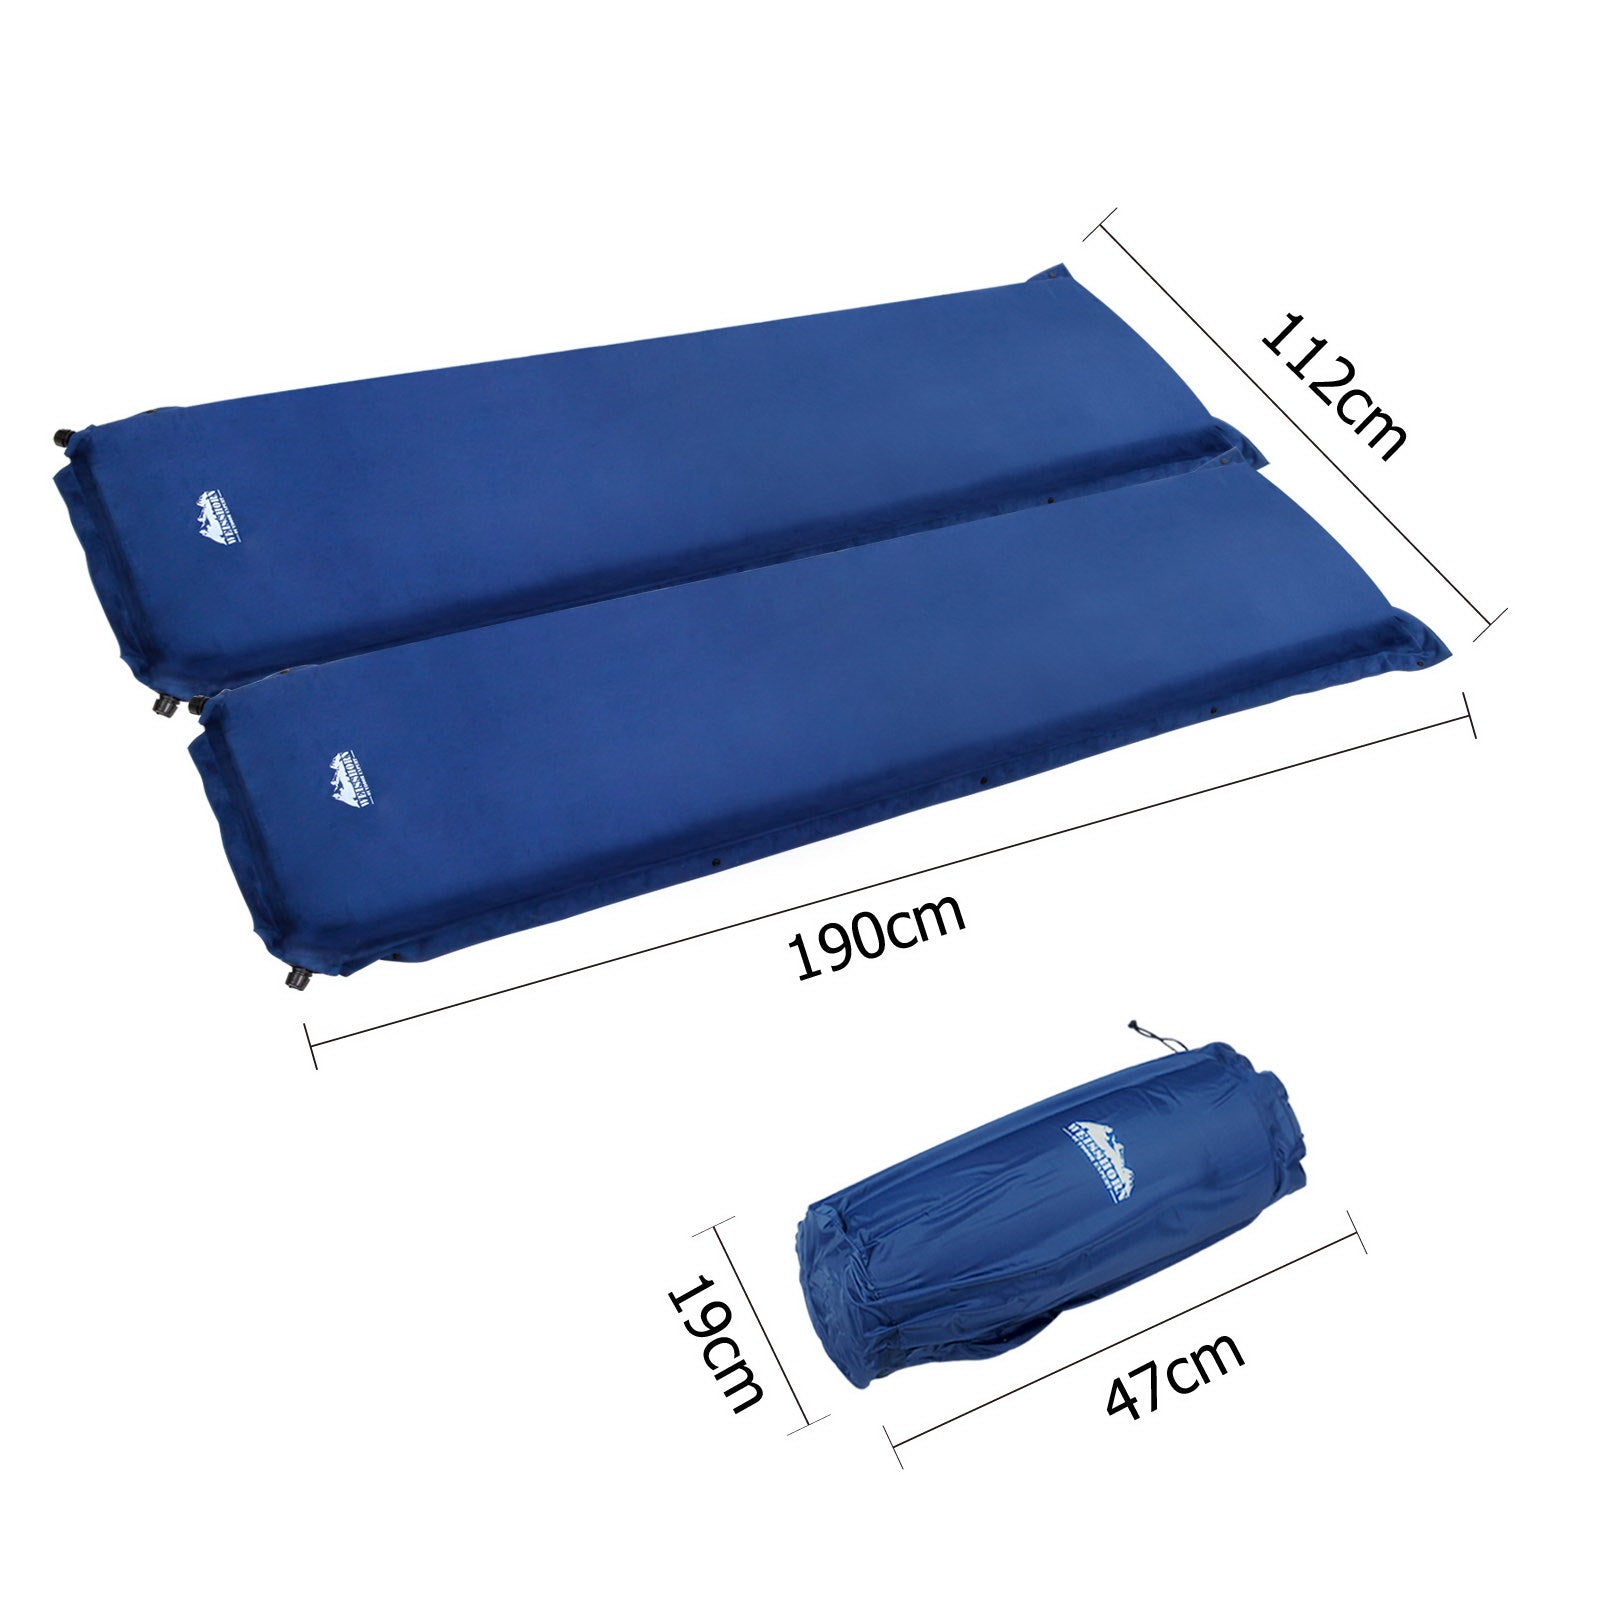 Weisshorn Self Inflating Mattress Camping Sleeping Mat Air Bed Pad Double Navy 10CM Thick